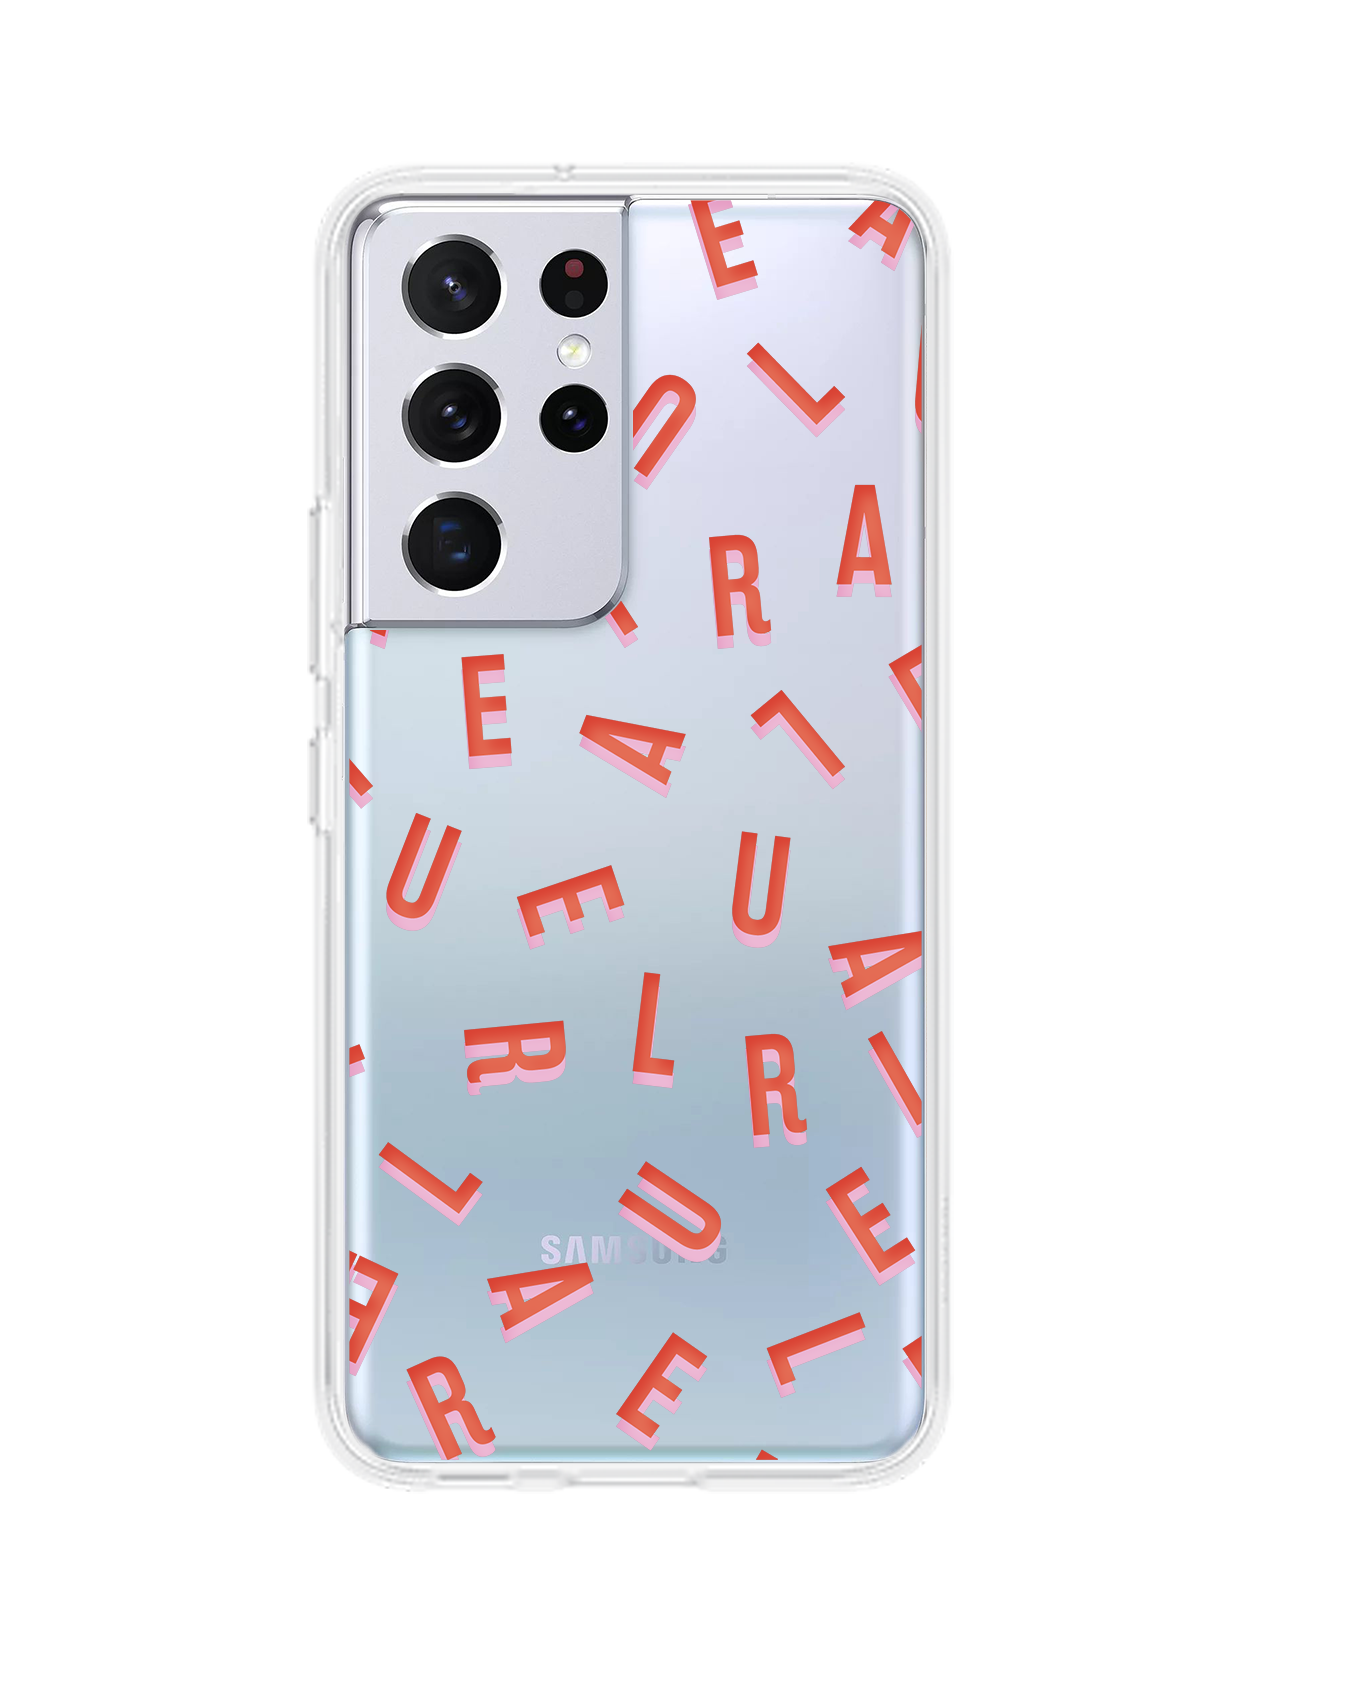 Android Rearguard Hybrid Case - CUSTOM MONOGRAM Coral